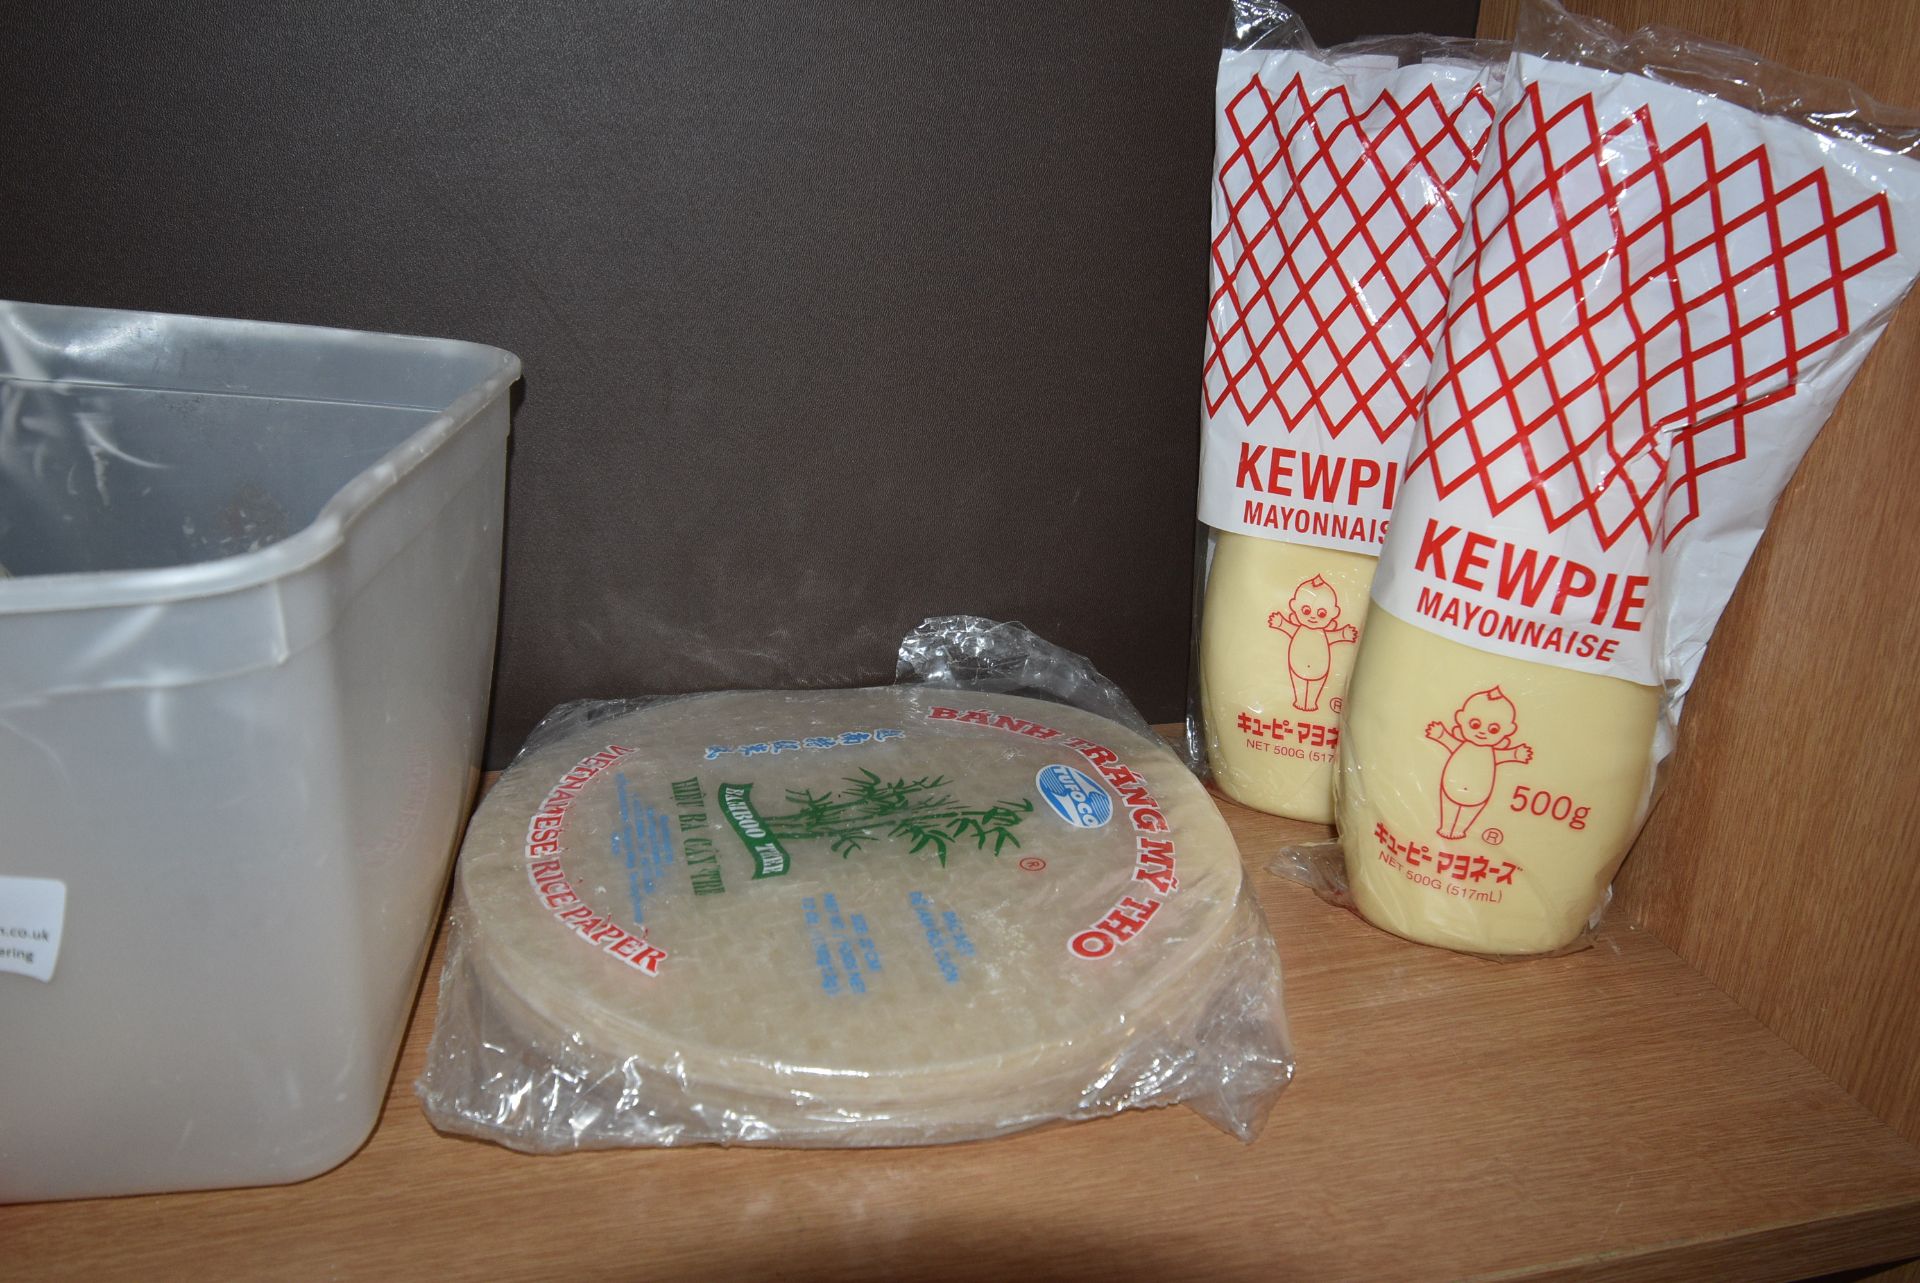 Contents of Shelf to Include Black Cherry Topping, Self Raising Flower, Mayonnaise, etc. - Image 3 of 3